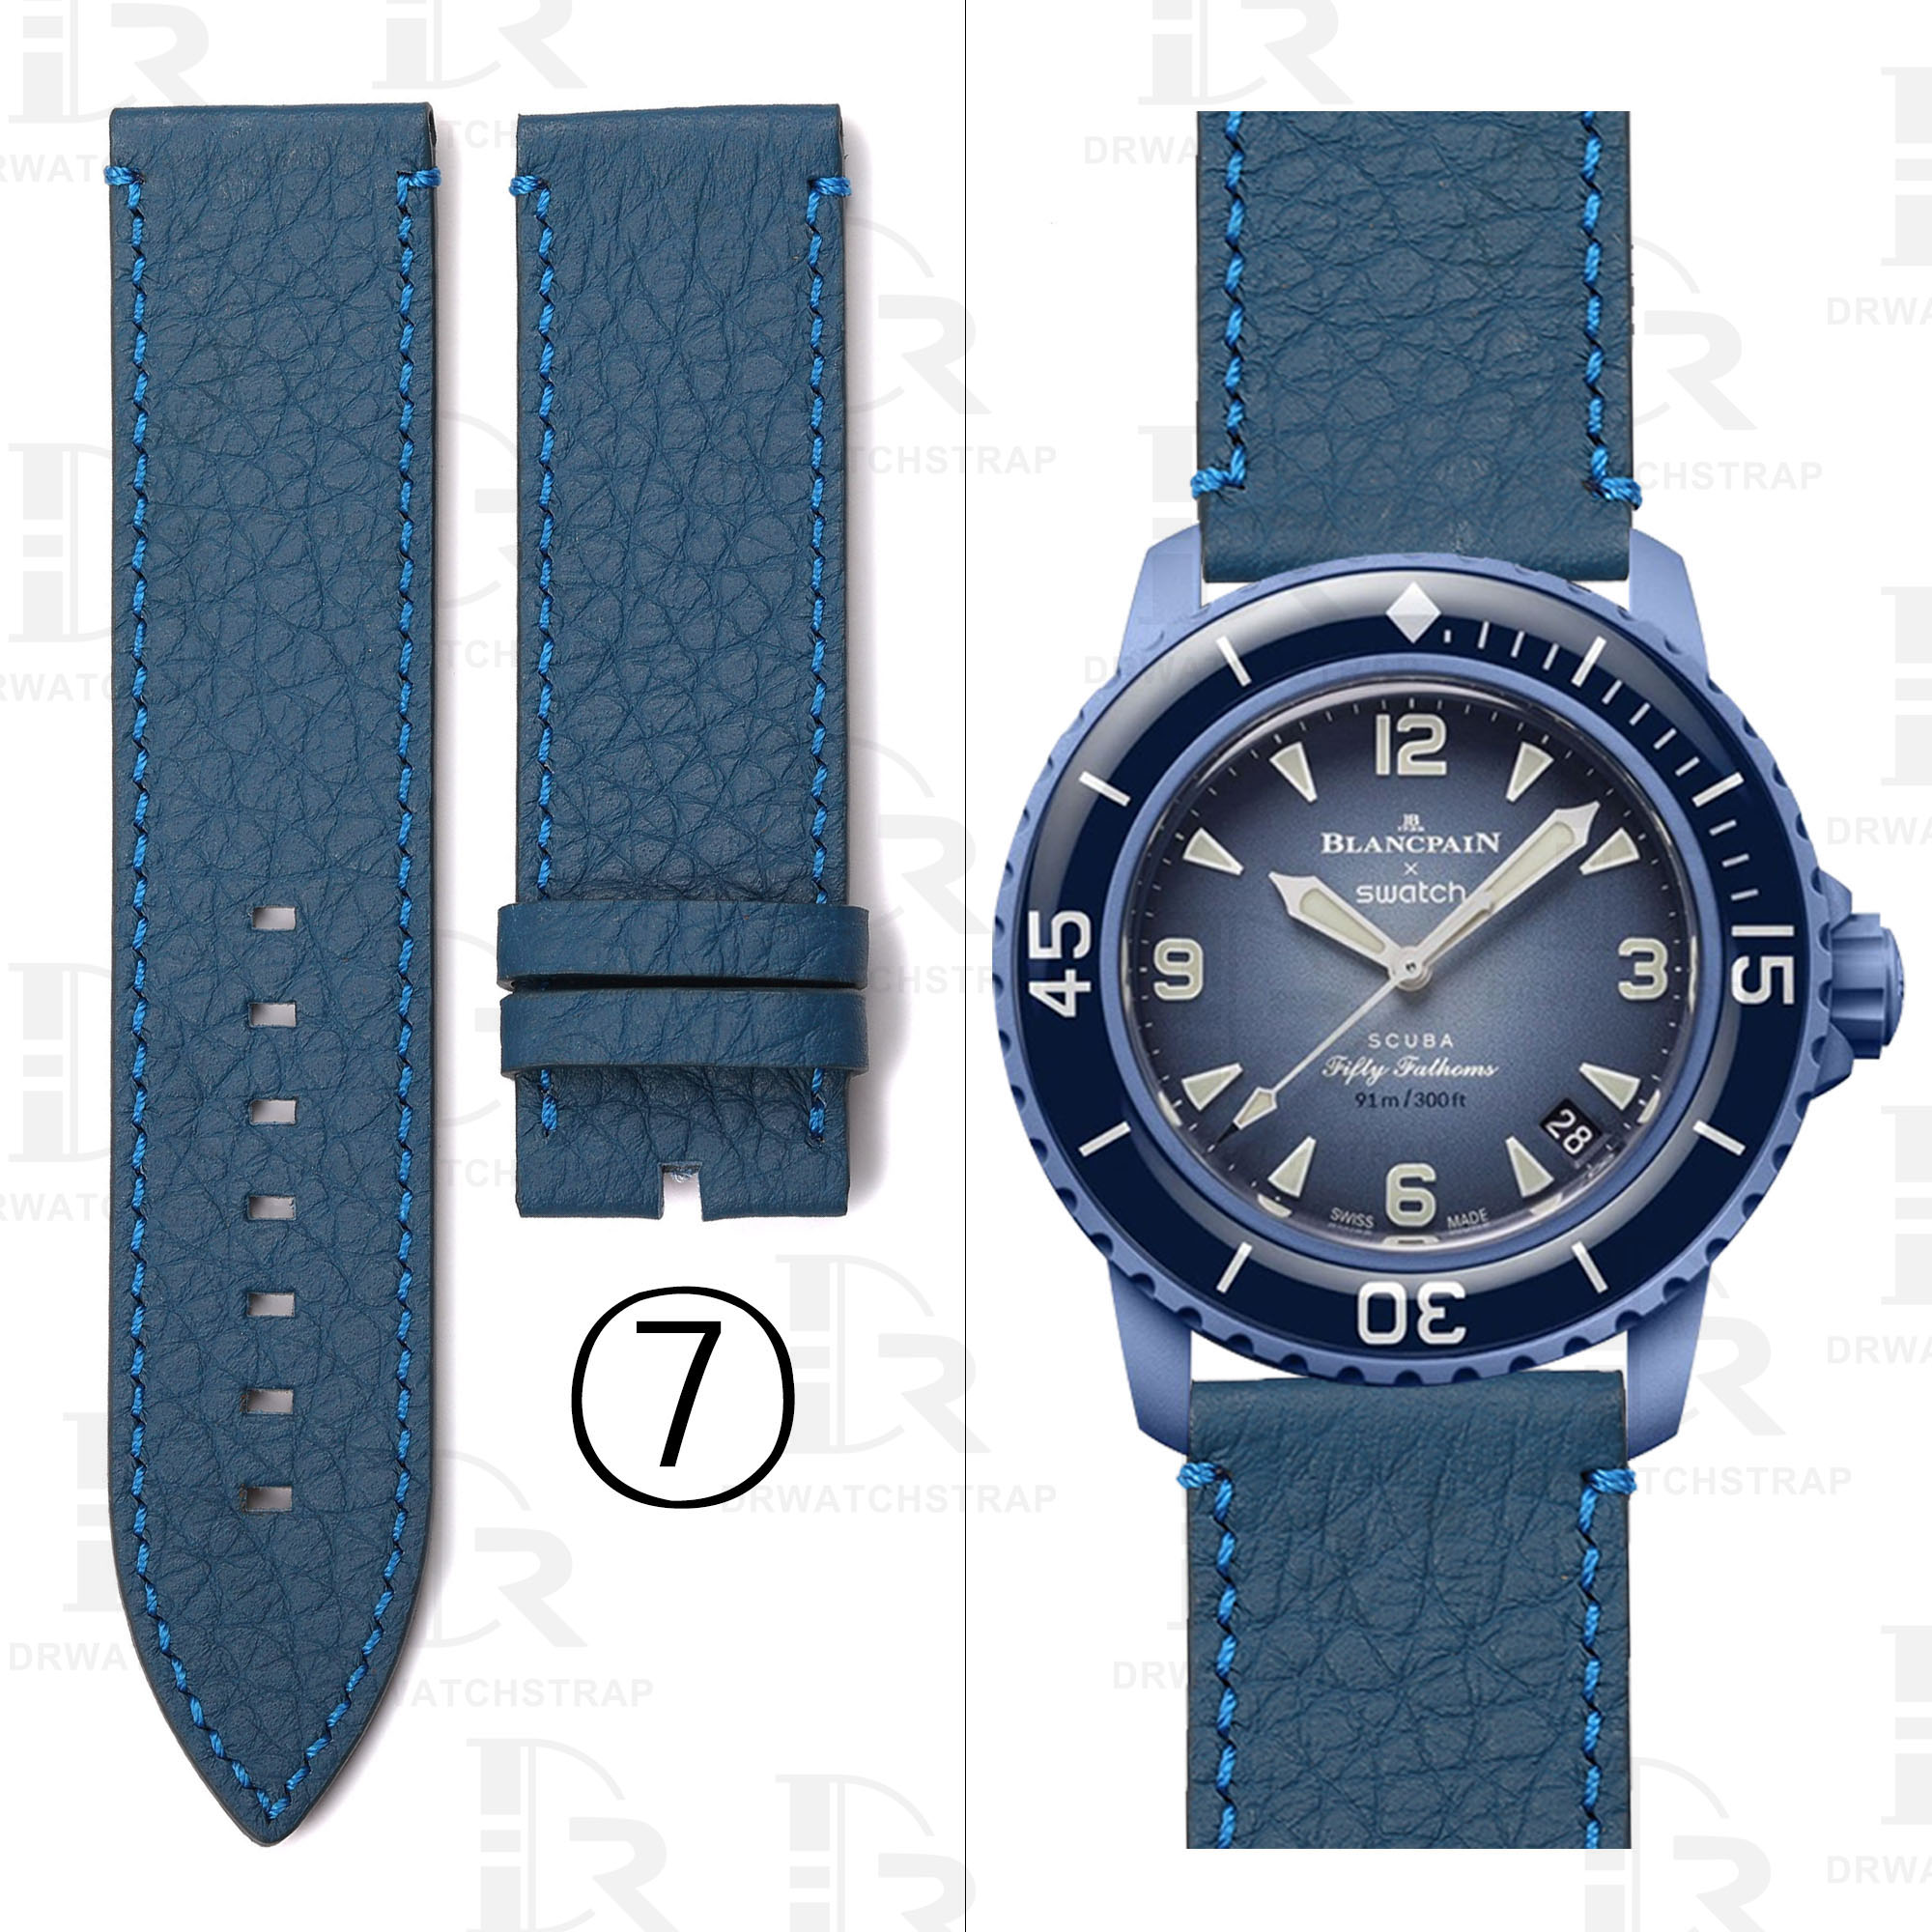 Buy Custom Blancpain x Swatch leather strap 22mm Blue Calfskin leather watch straps